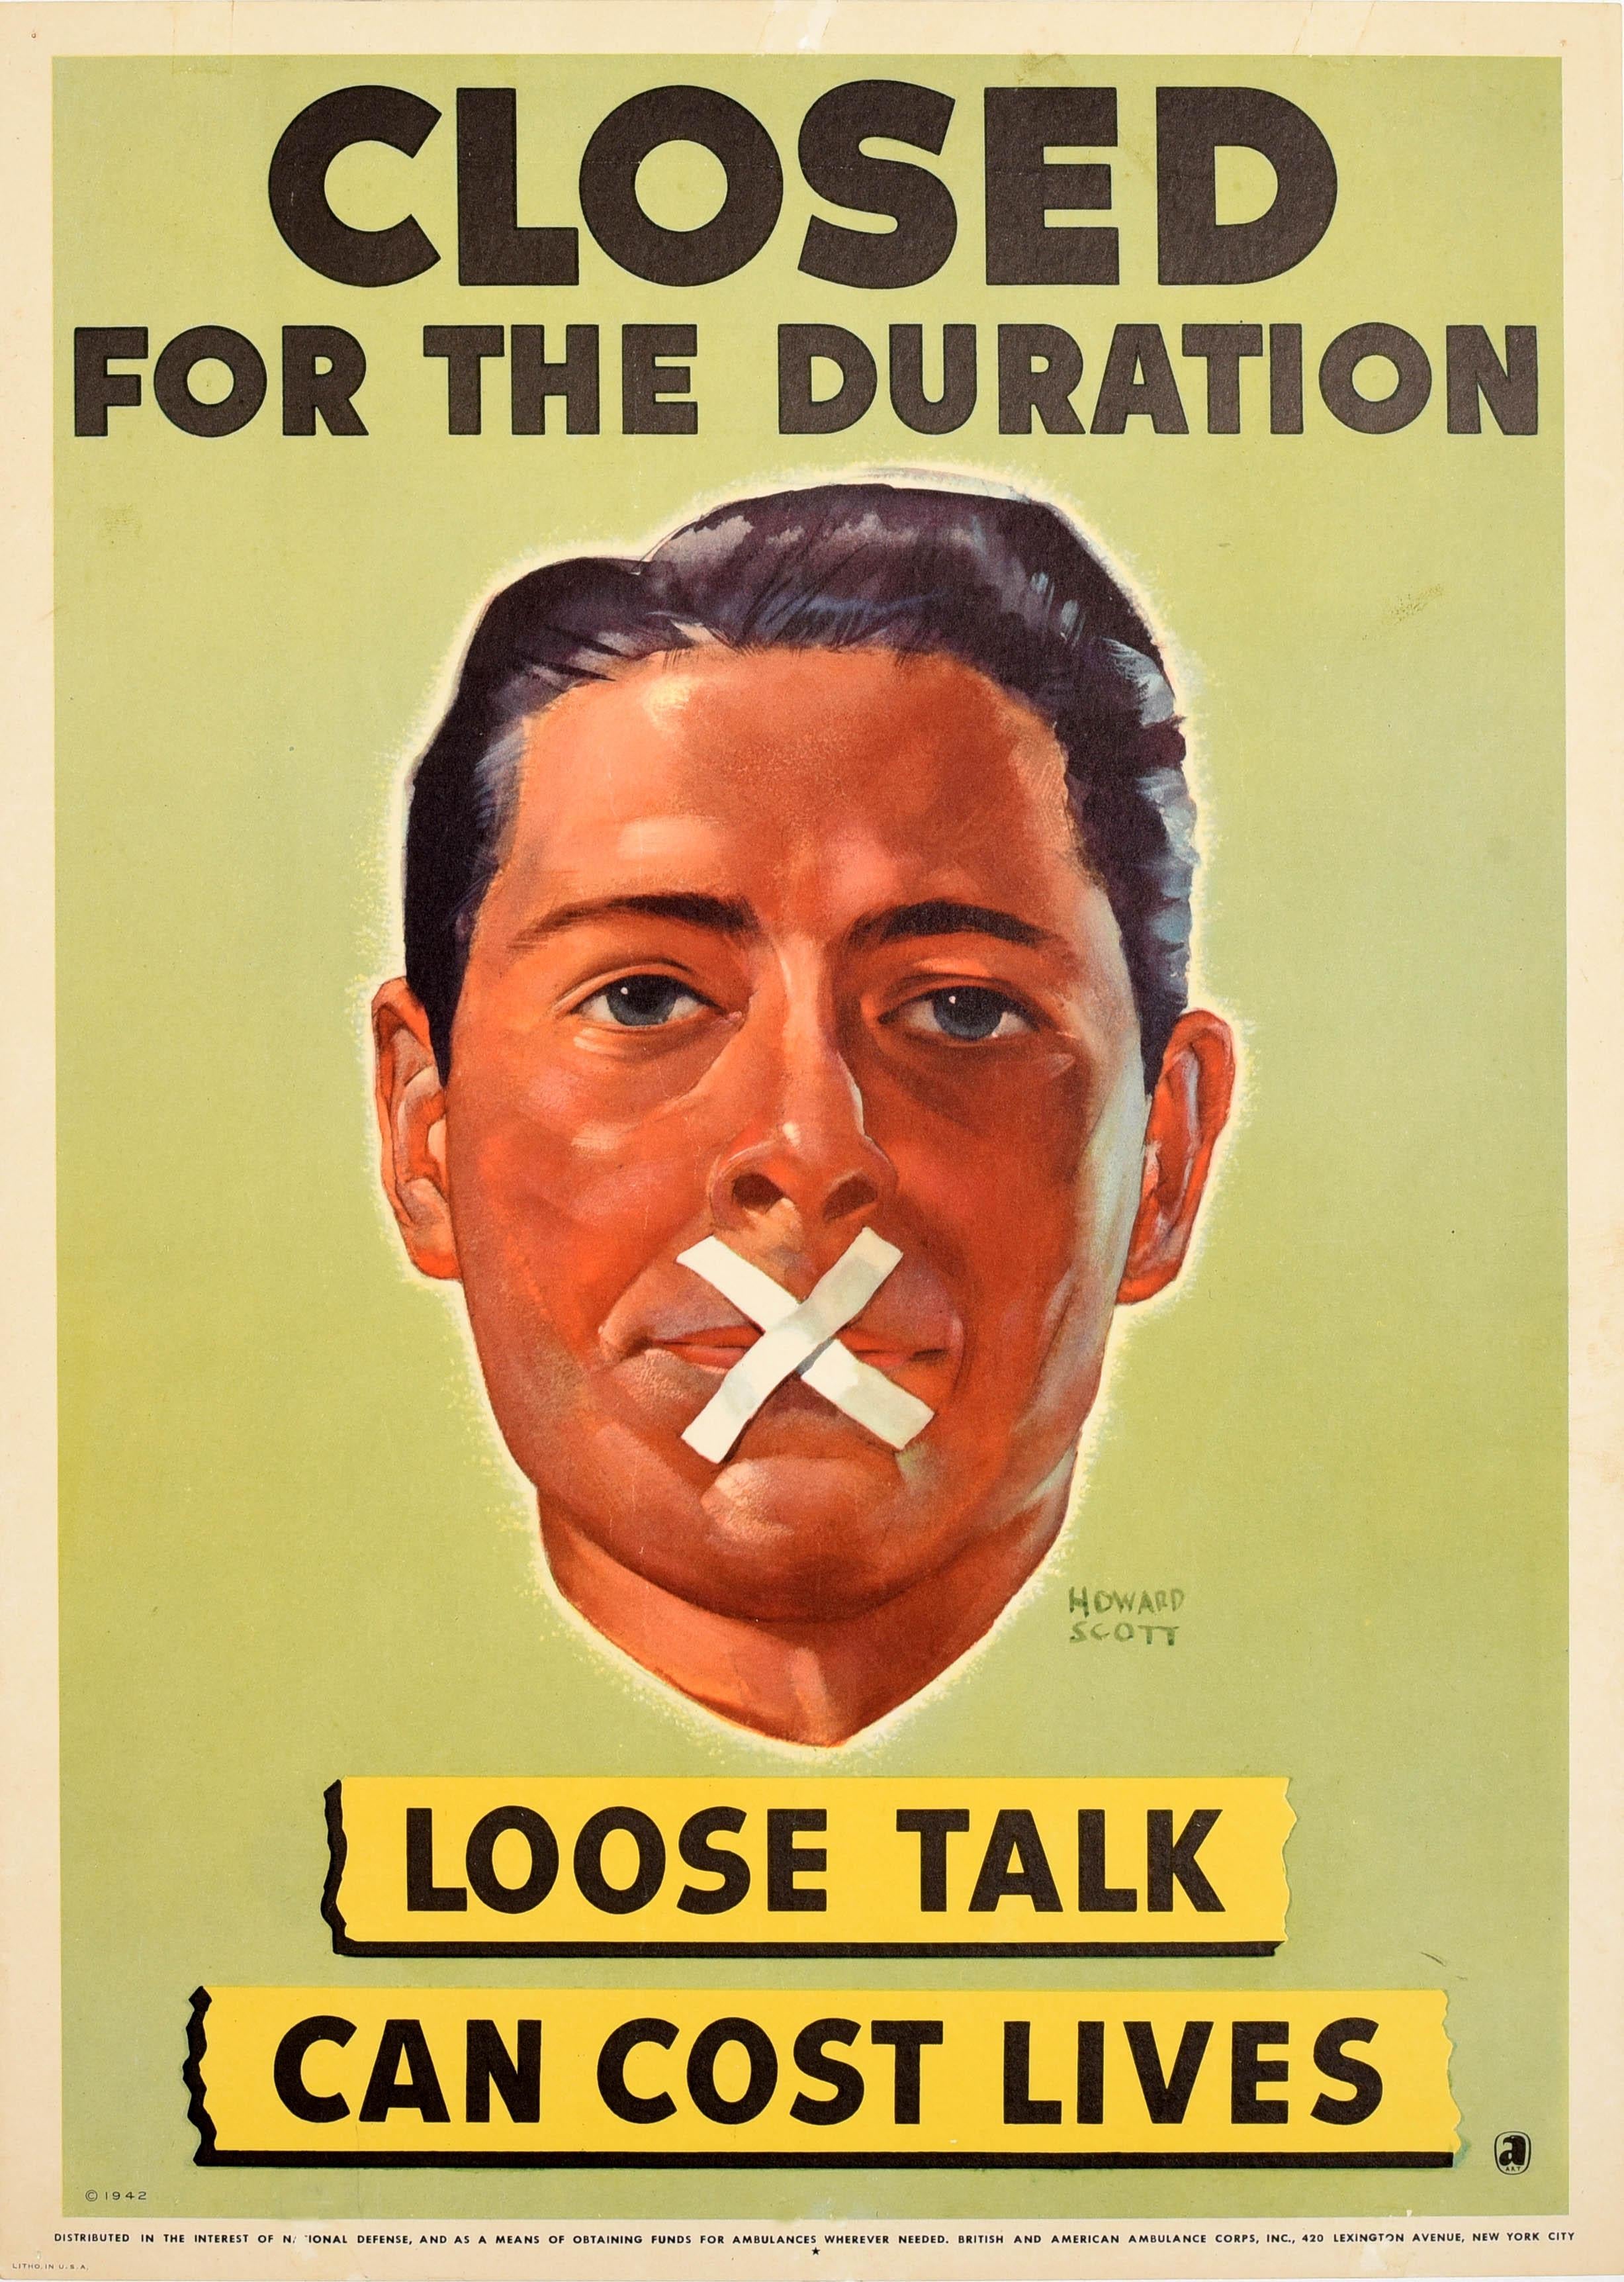 Howard Scott Print - Original Vintage Poster Closed For The Duration Loose Talk Can Cost Lives WWII